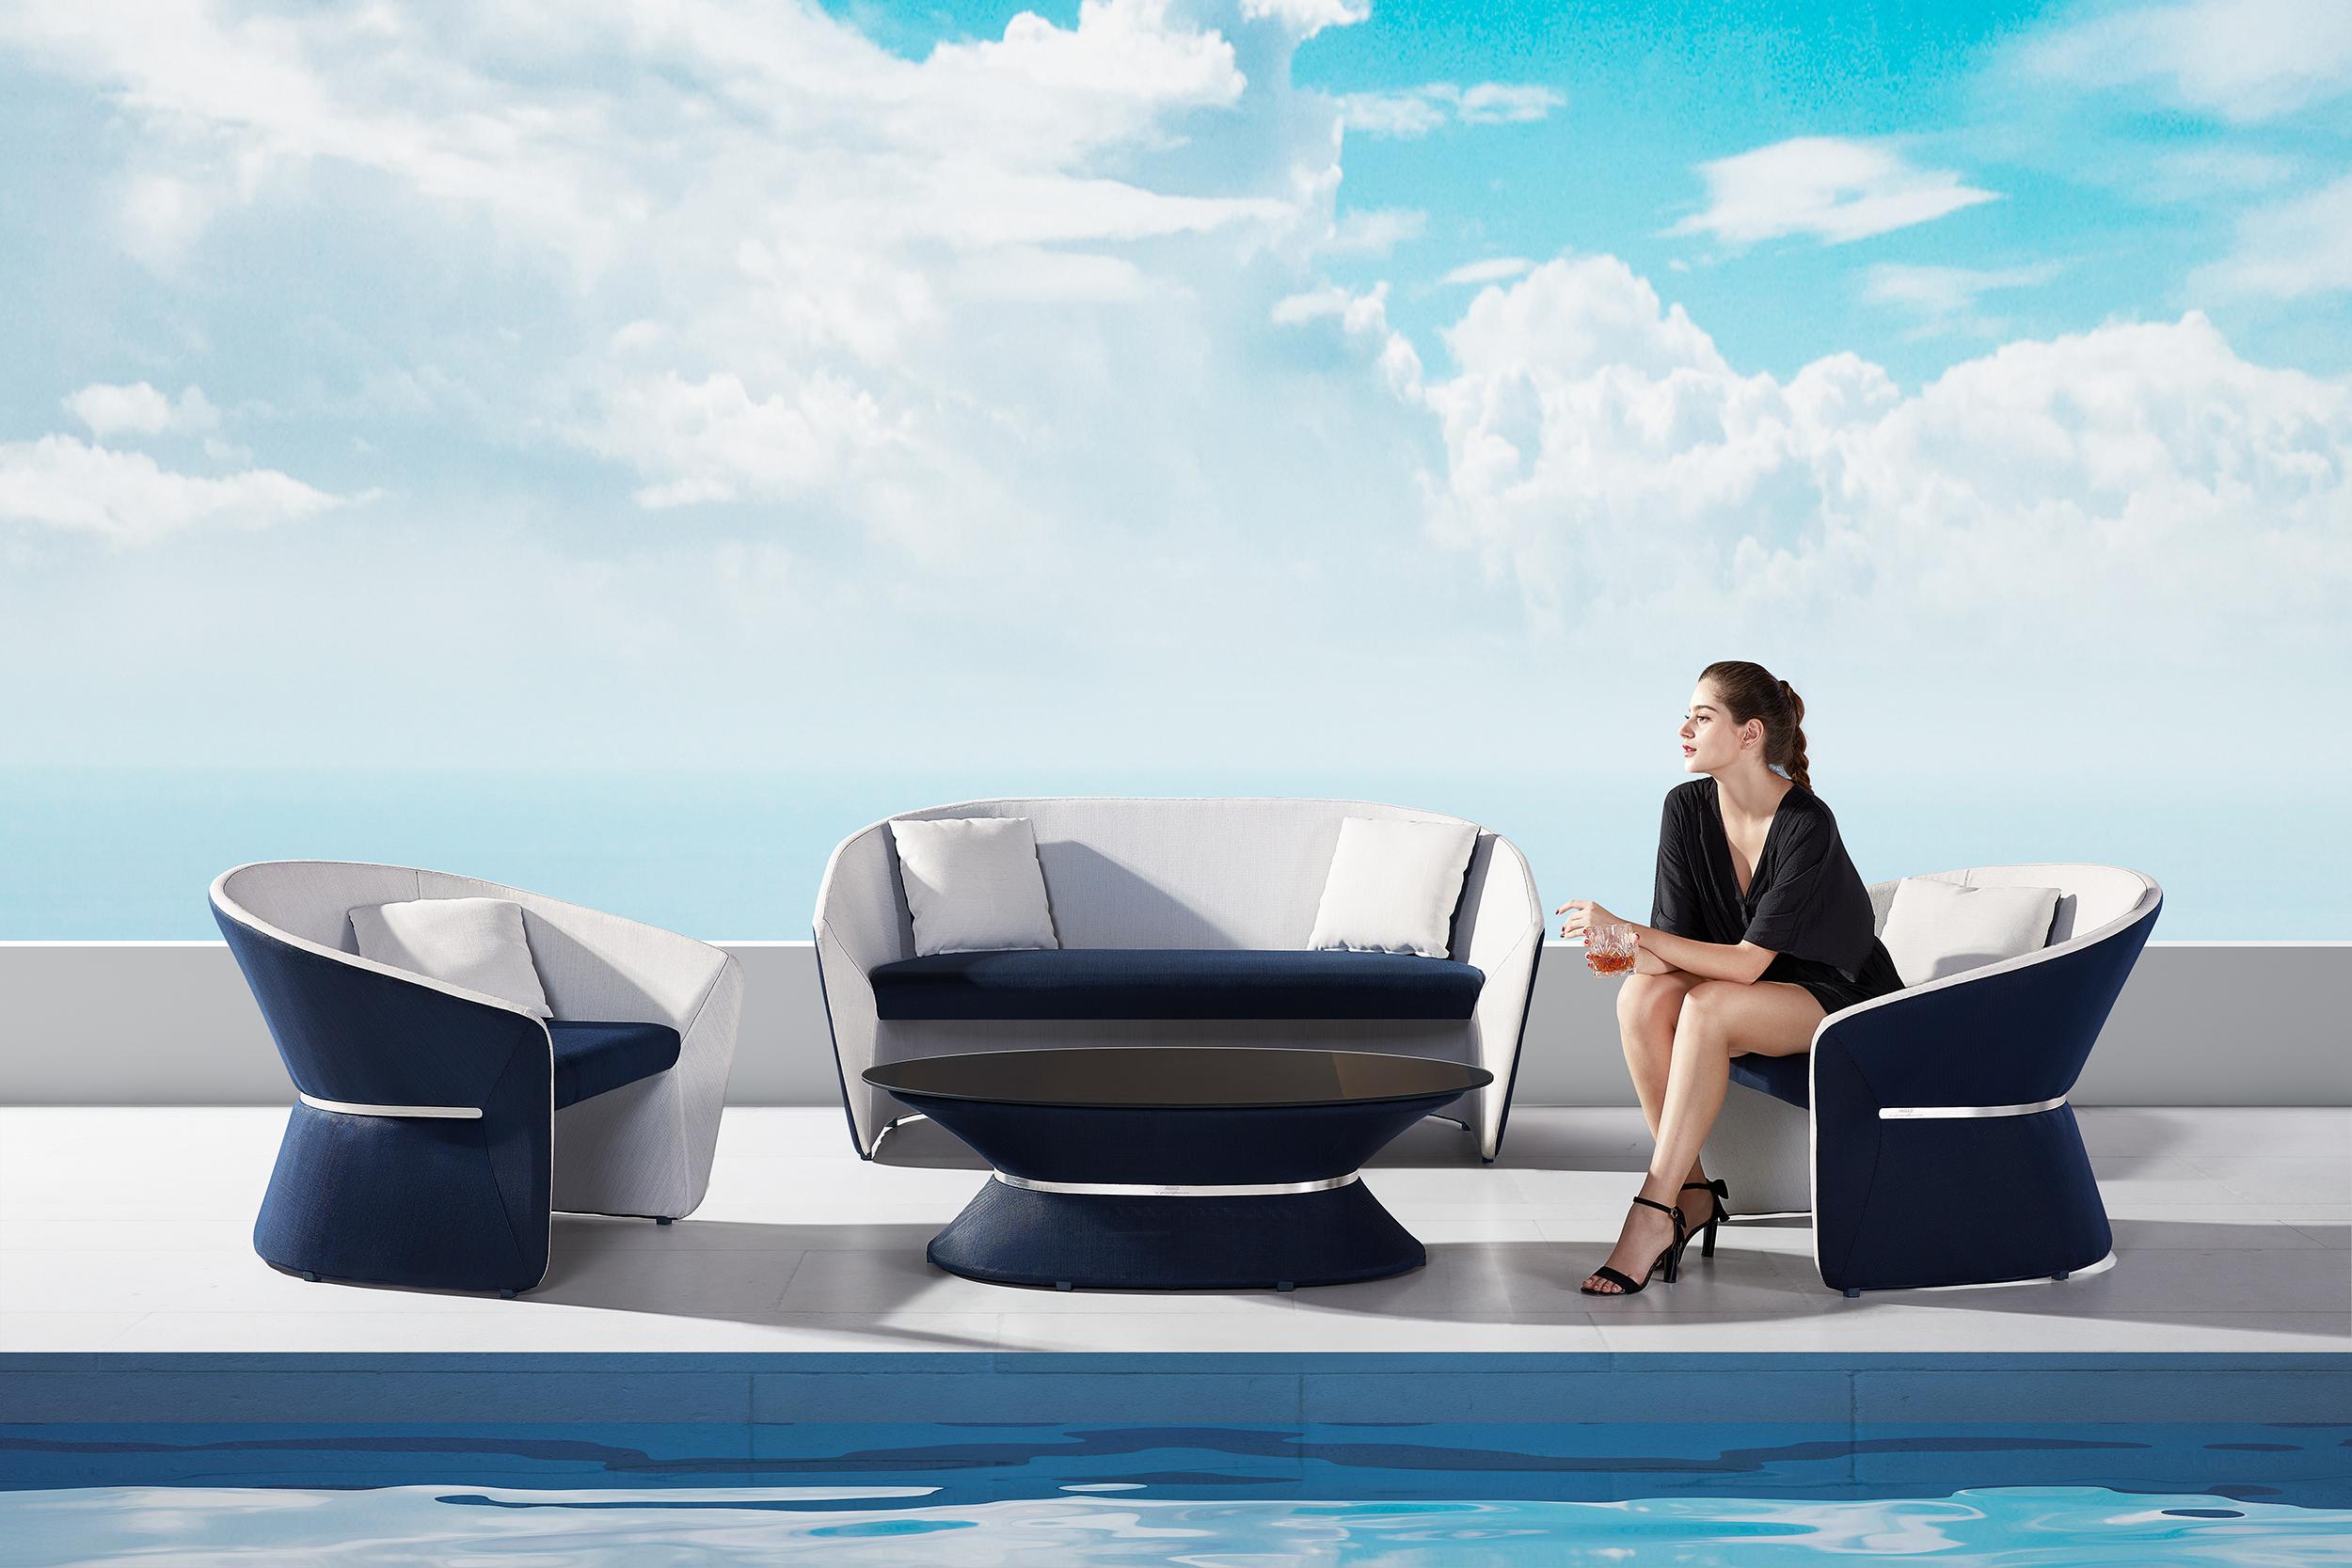 Outdoor collection designed by Pininfarina. 
Materials: Aluminum frame. Polyester mesh fabric. Top with HPL surface
Dimensions: 120 x 65 x h 36,5 cm

The design concept behind this collection is that of wanting to merge lightness, but at the same